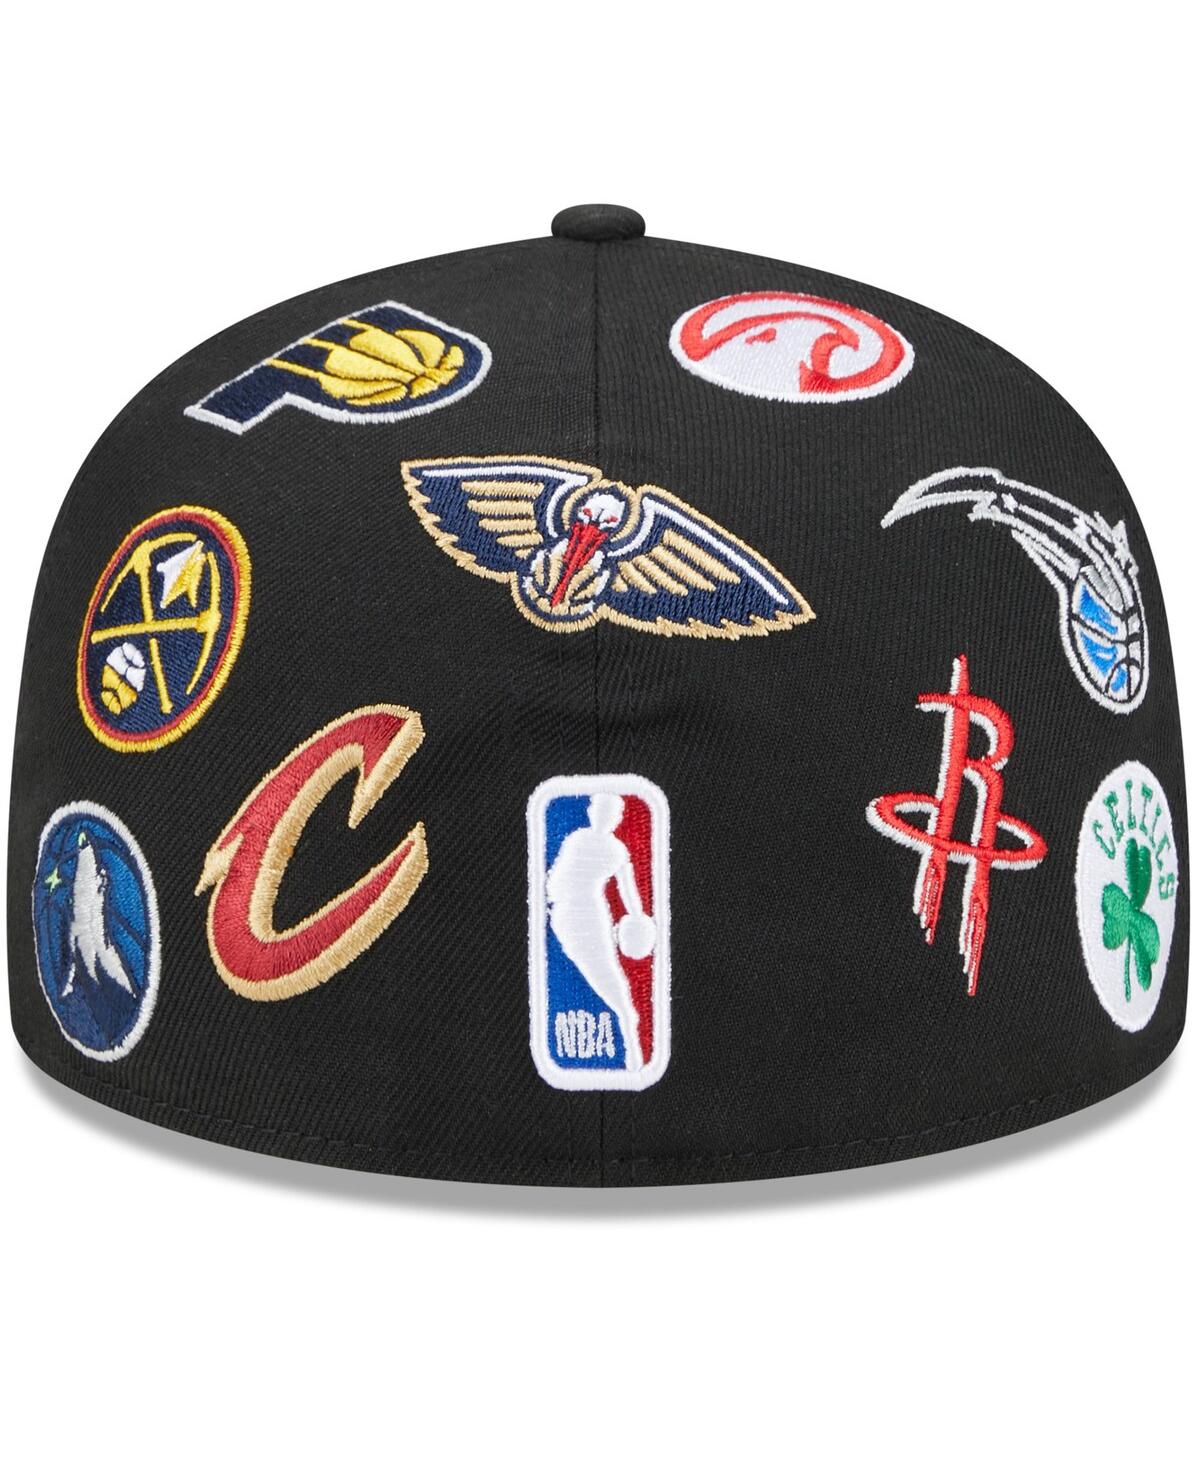 Shop Staple Men's New Era Black Nba X  59fifty Fitted Hat